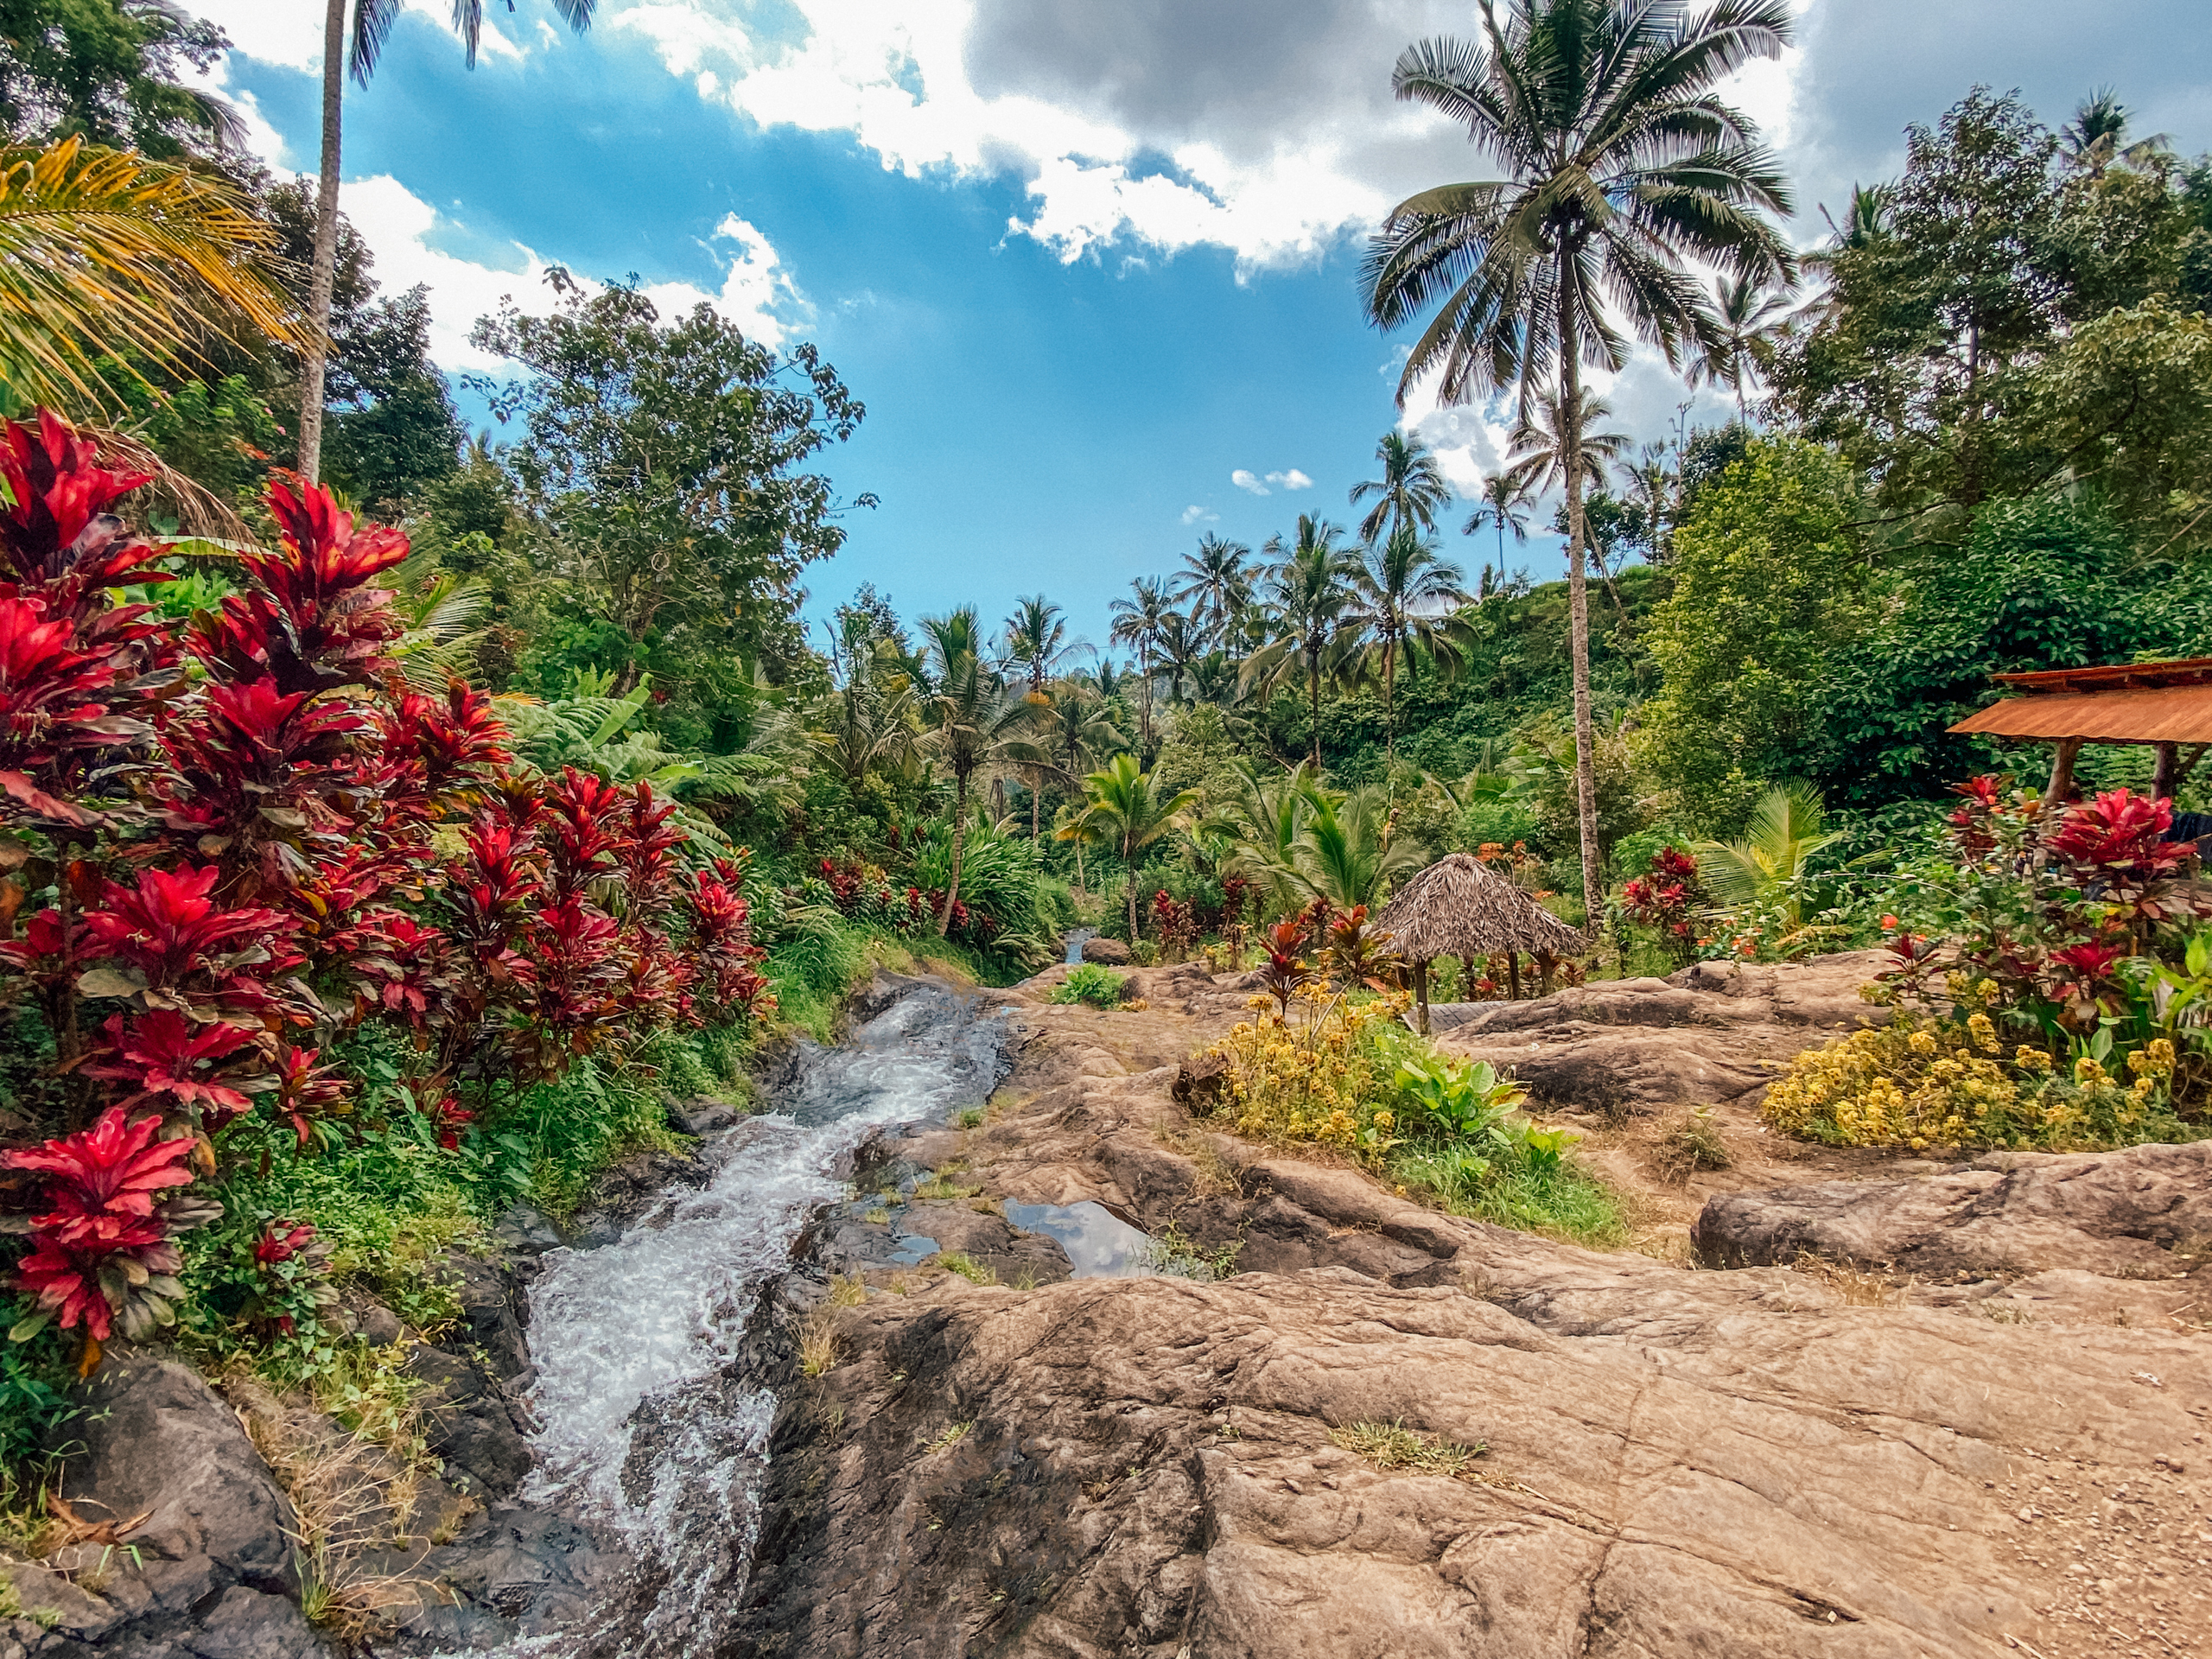 luscious green forest in Bali with colorful flowers and a stream running through